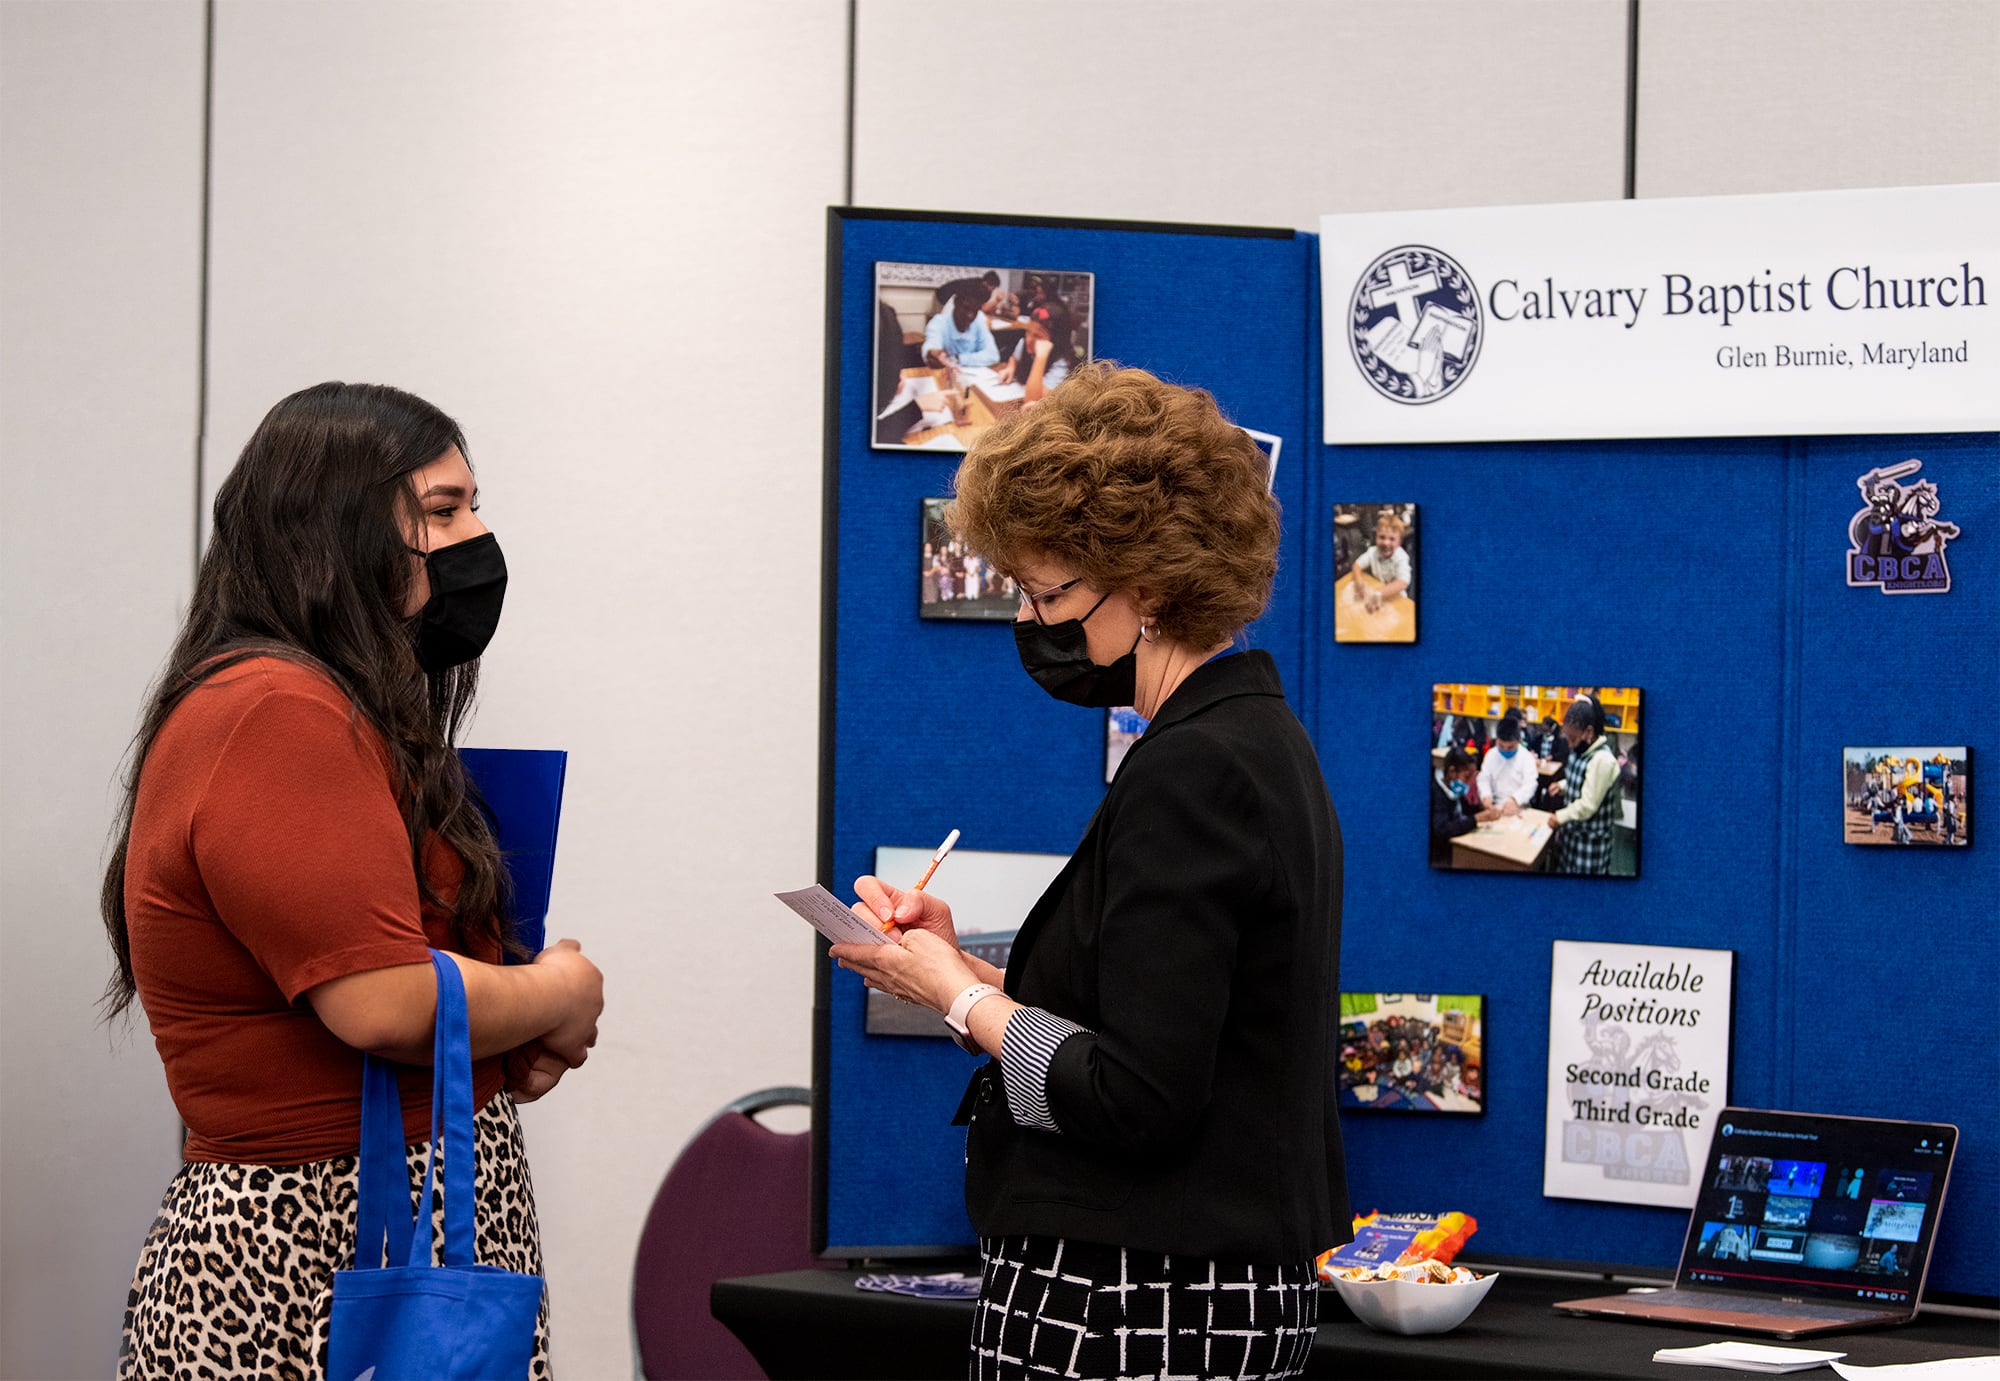 Female student meets with recruiter from Calvary Baptist Church